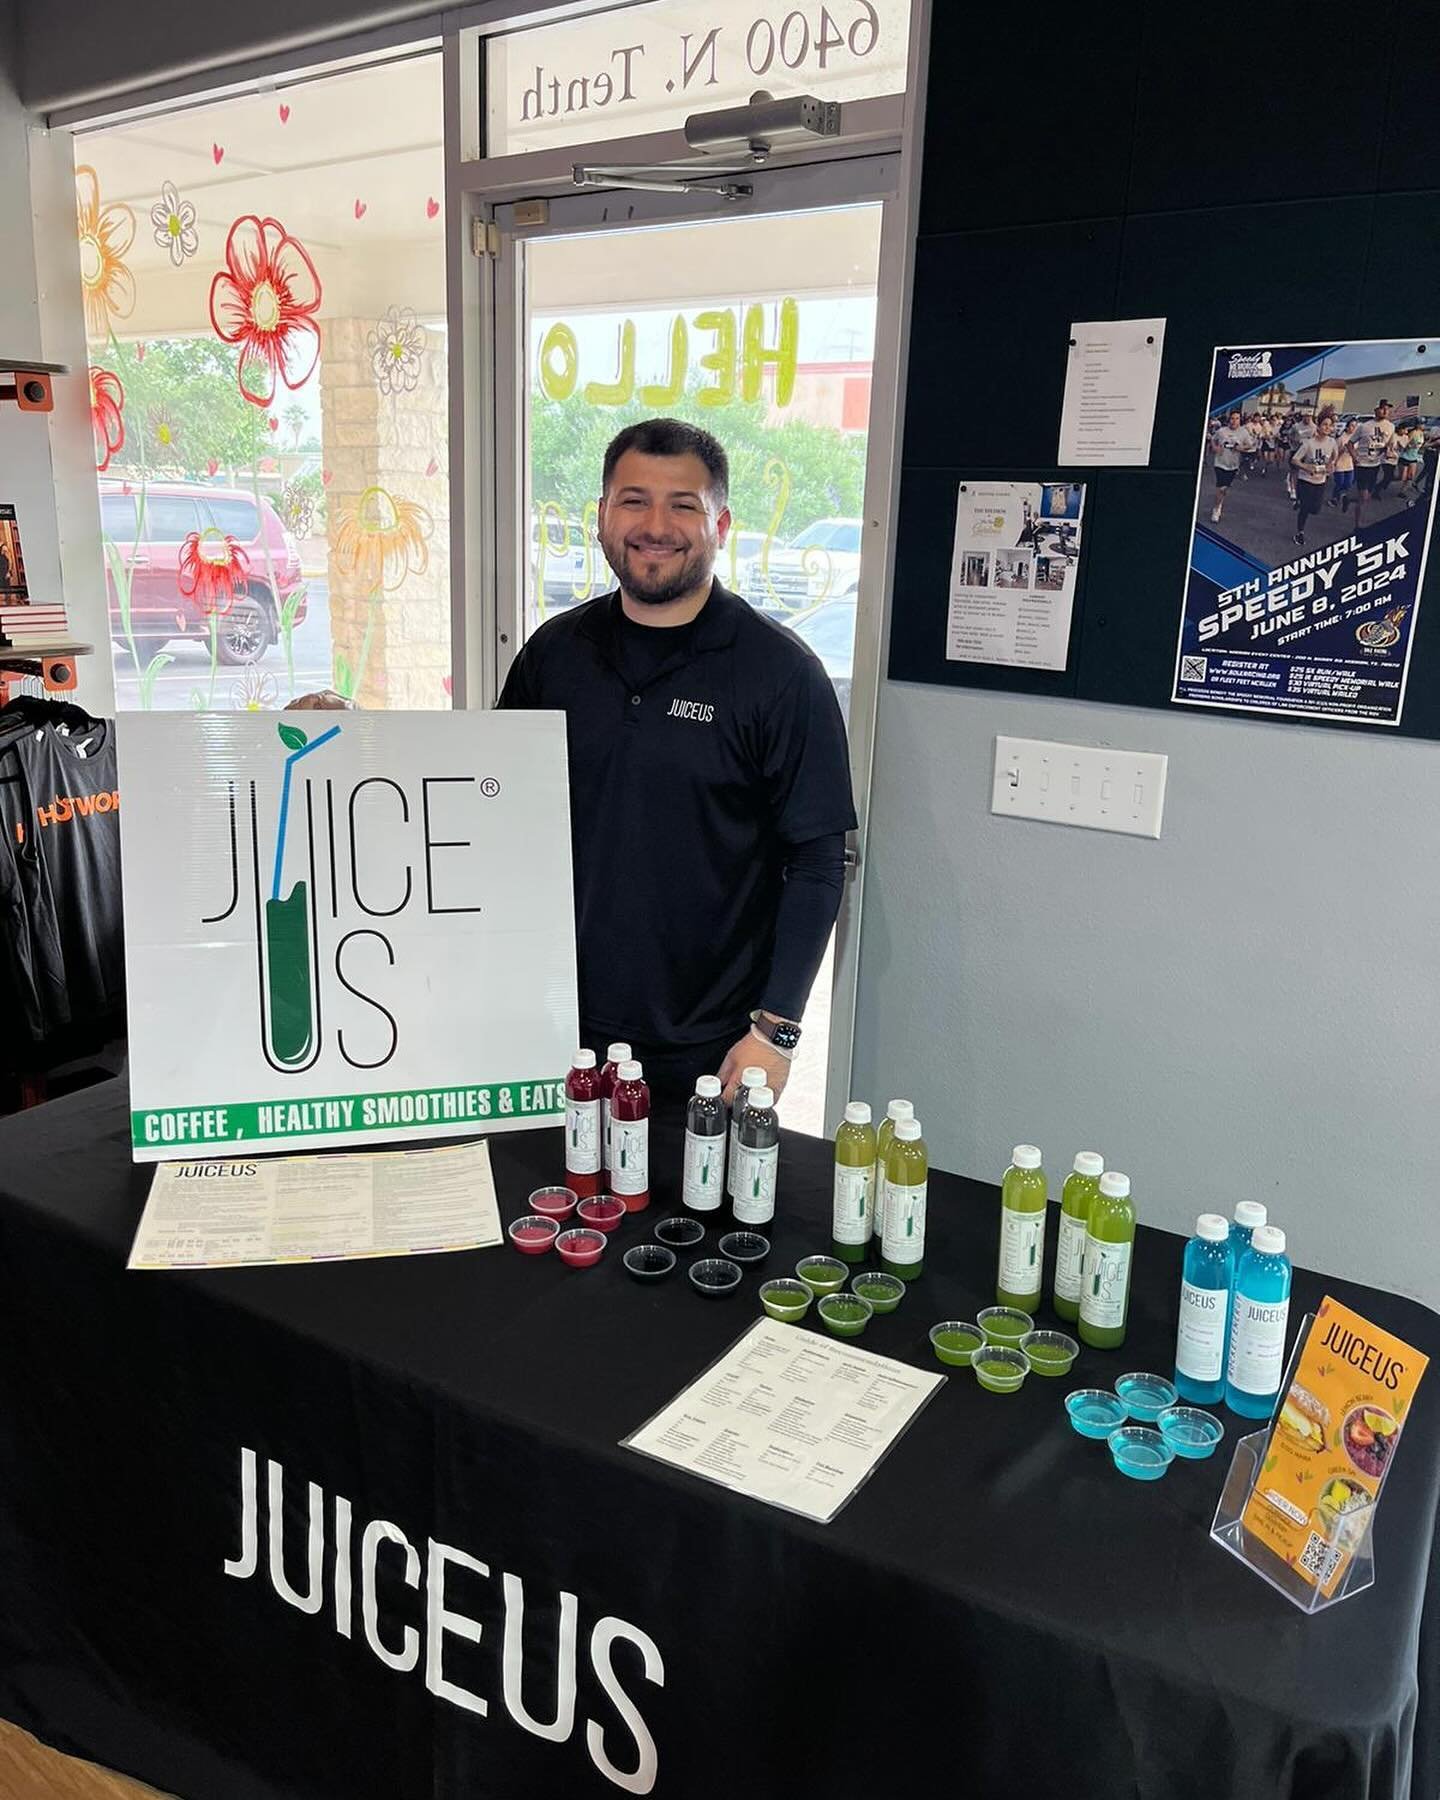 Fueled up your workout! 💥Last weekend, we stopped by @hotworxmcallennorth with our @juiceus_ booth and shared samples of our cold-pressed juices and our new energy drink, ROCKET ENERGY! 🌟 

Did you try one? Let us know in the comments! 👇

 #juiceu